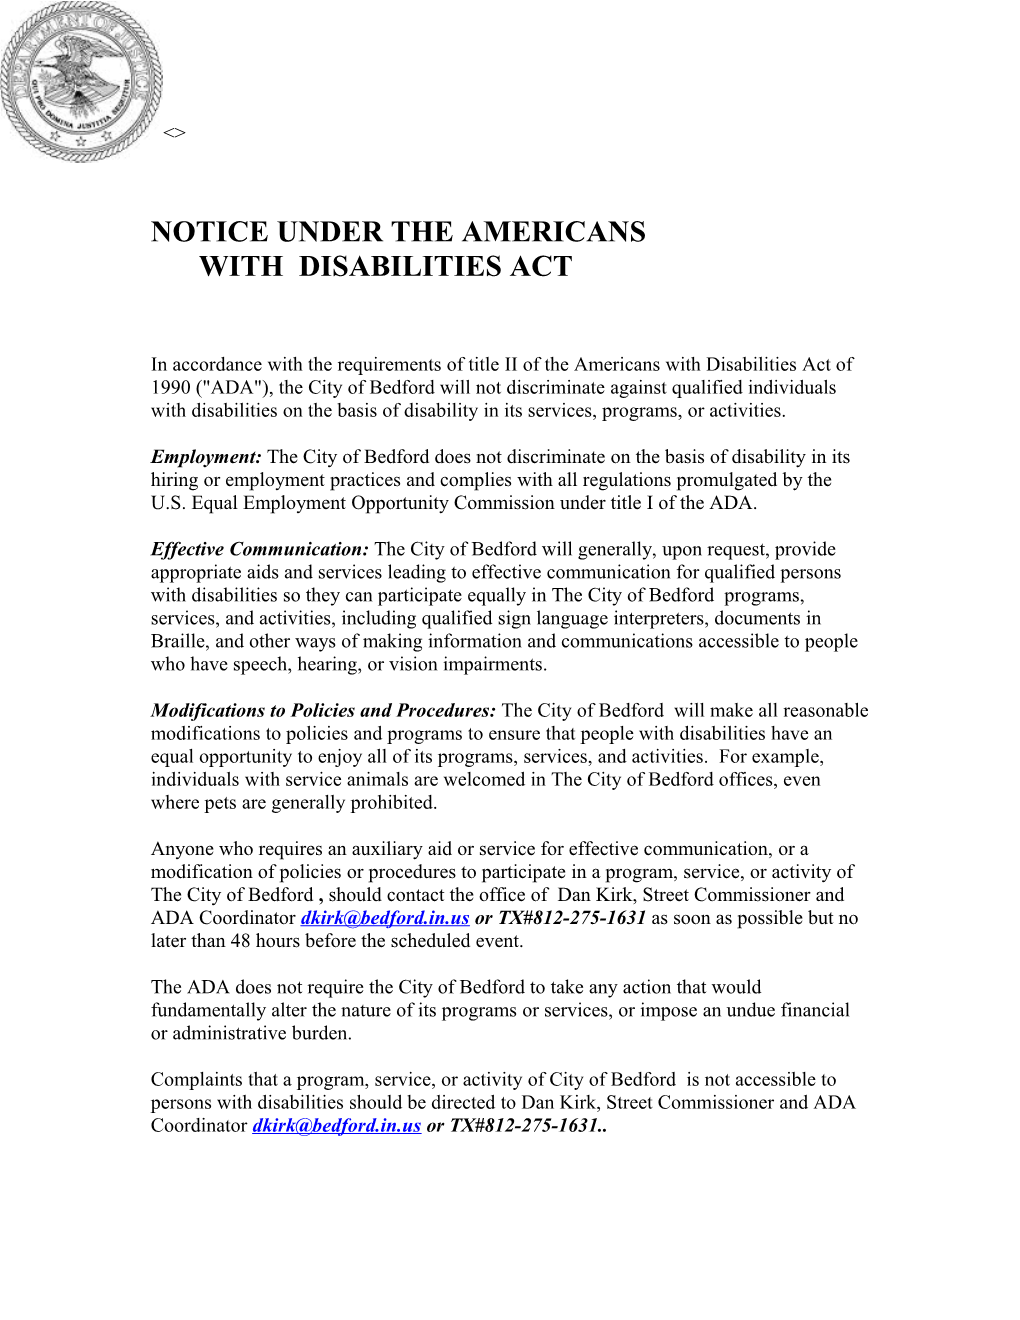 Notice Under the Americanswith Disabilities Act